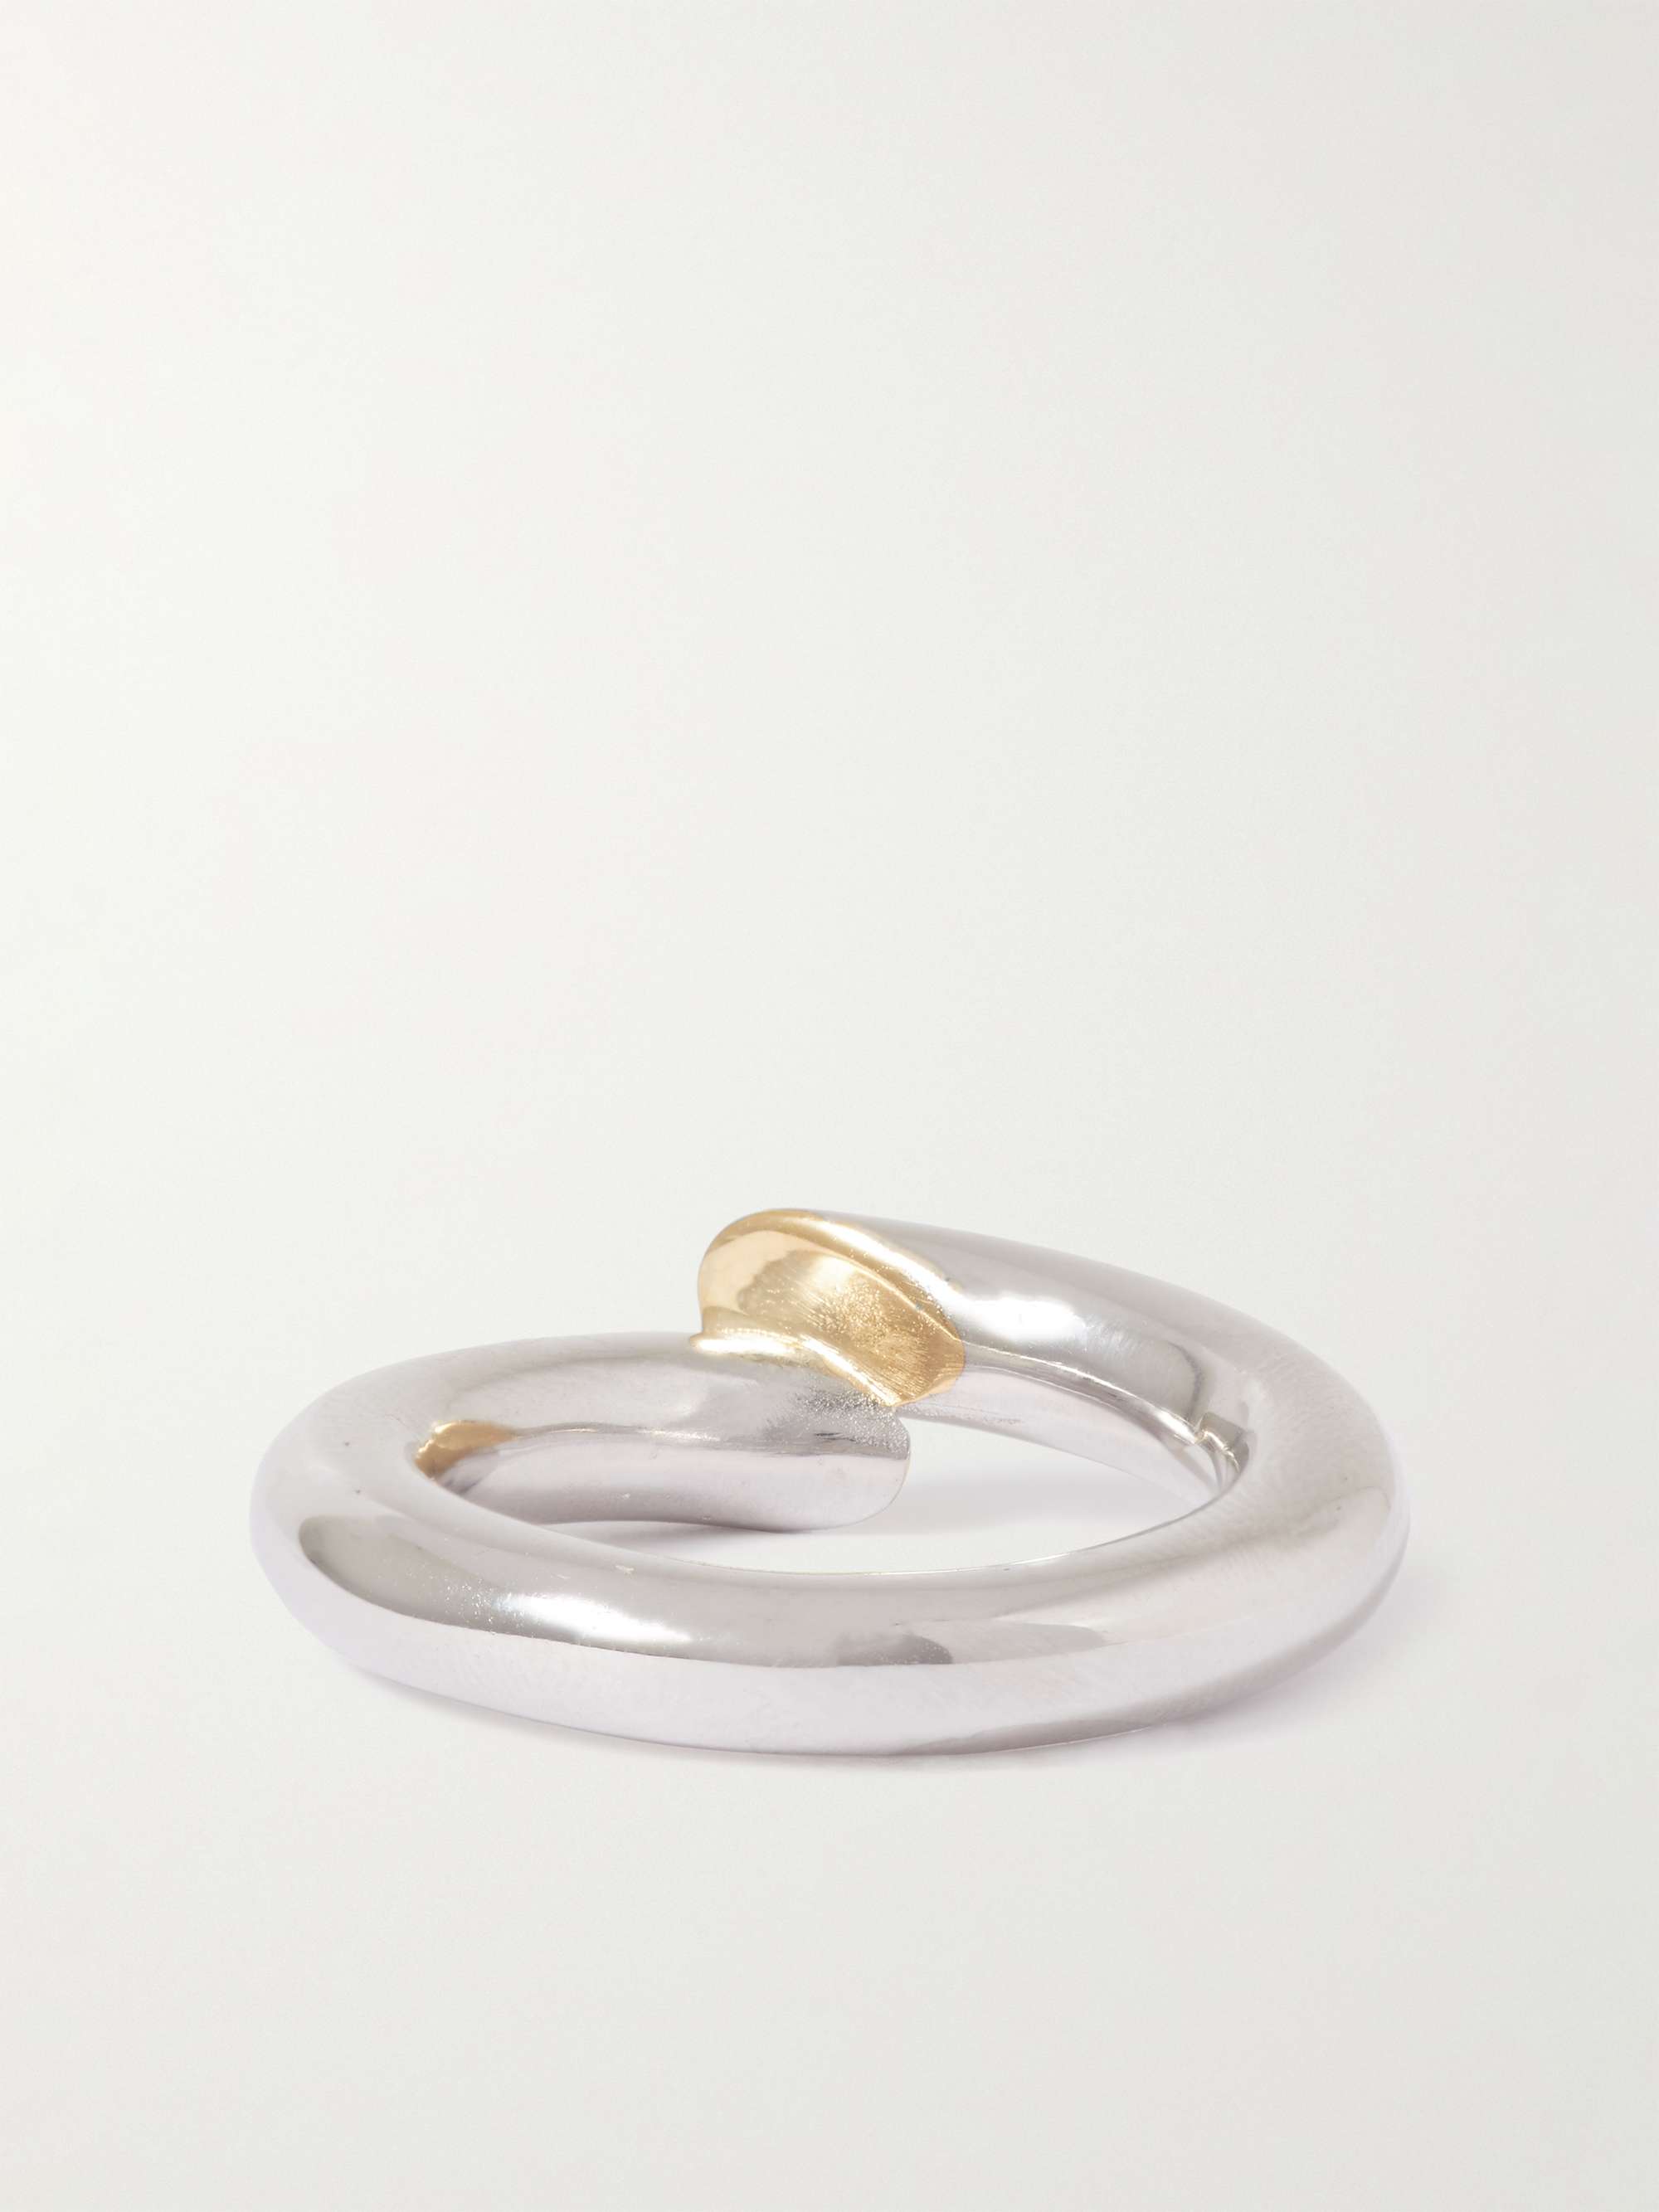 LANVIN Silver and Gold-Tone Ring